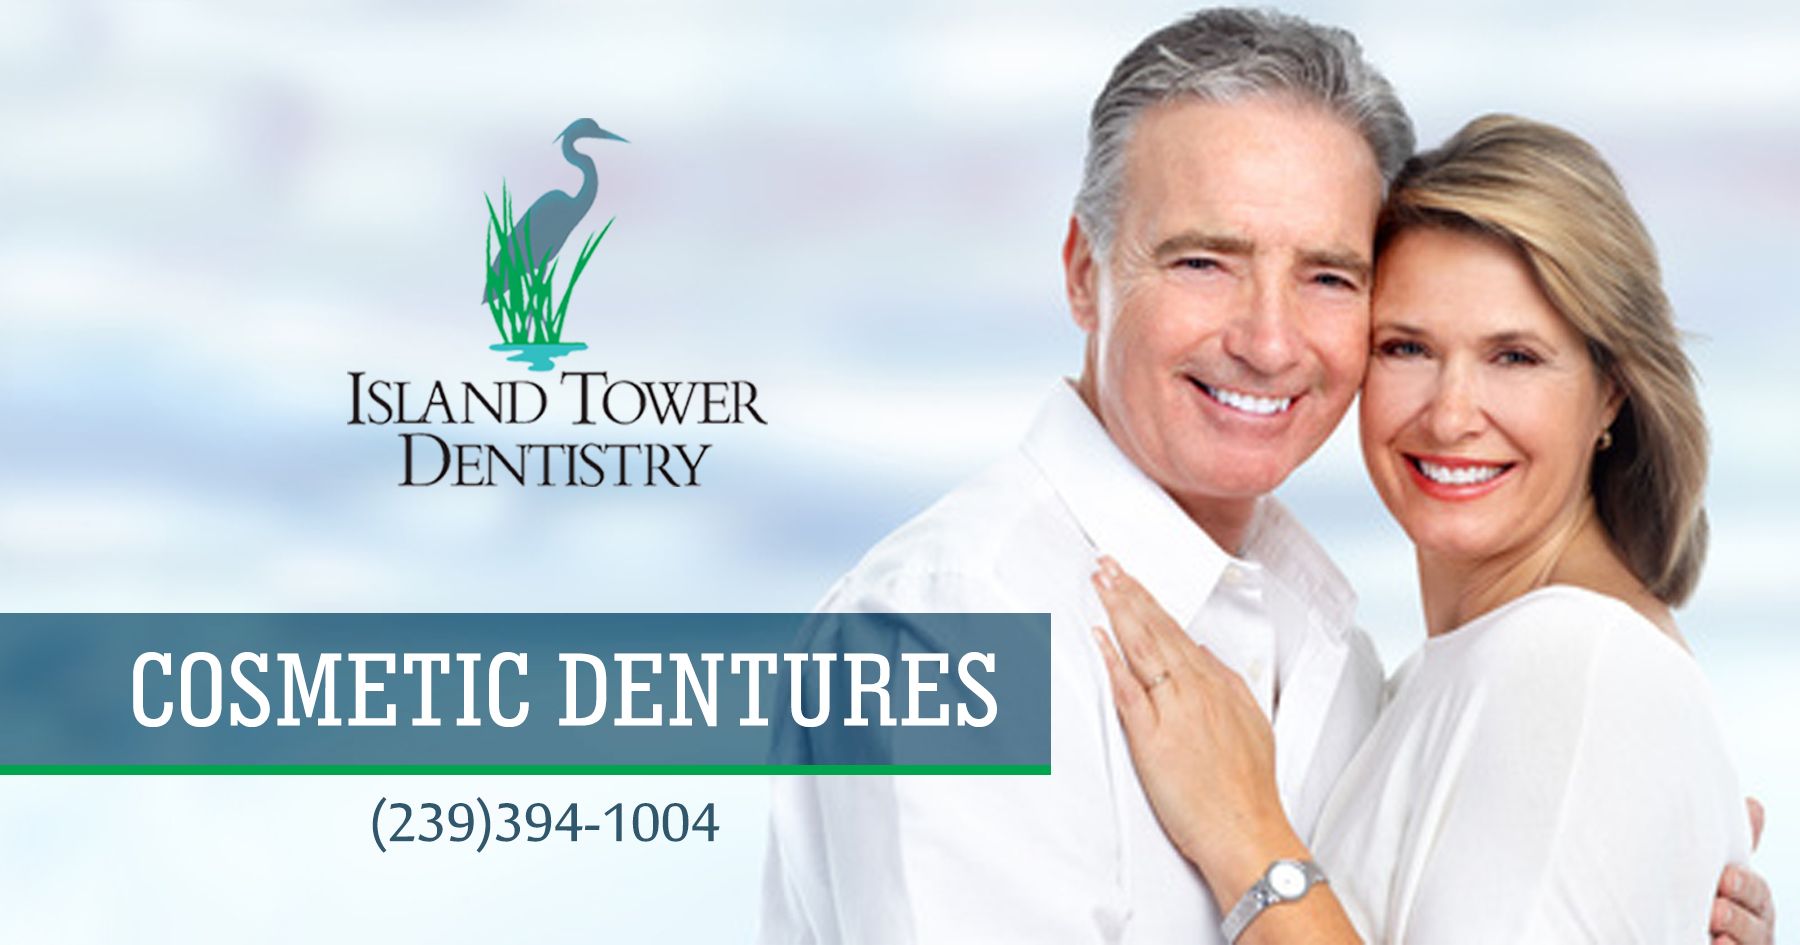 Marco Island Dentists offer Cosmetic Dentures